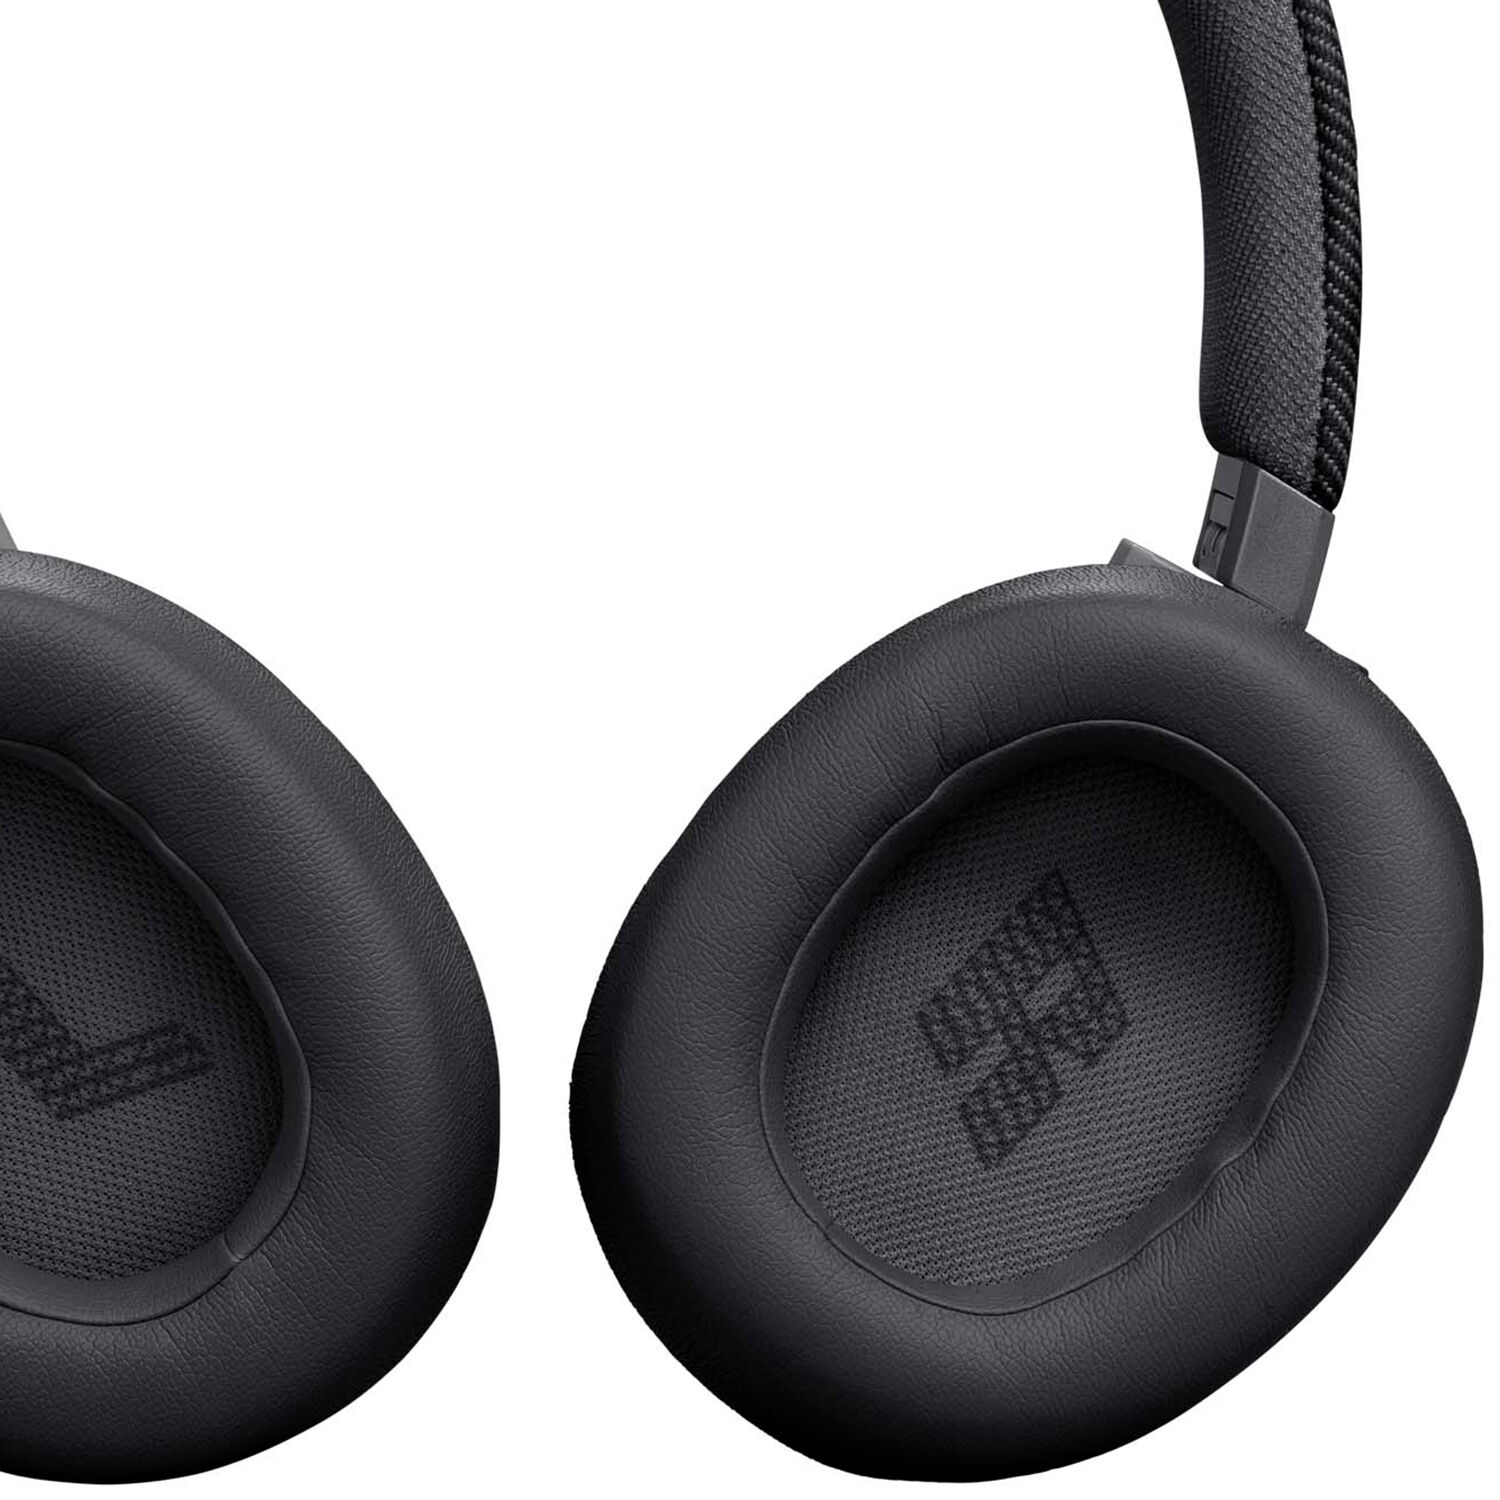 JBL - Live 770NC Wireless Noise Cancelling Over-The-Ear Headphones 